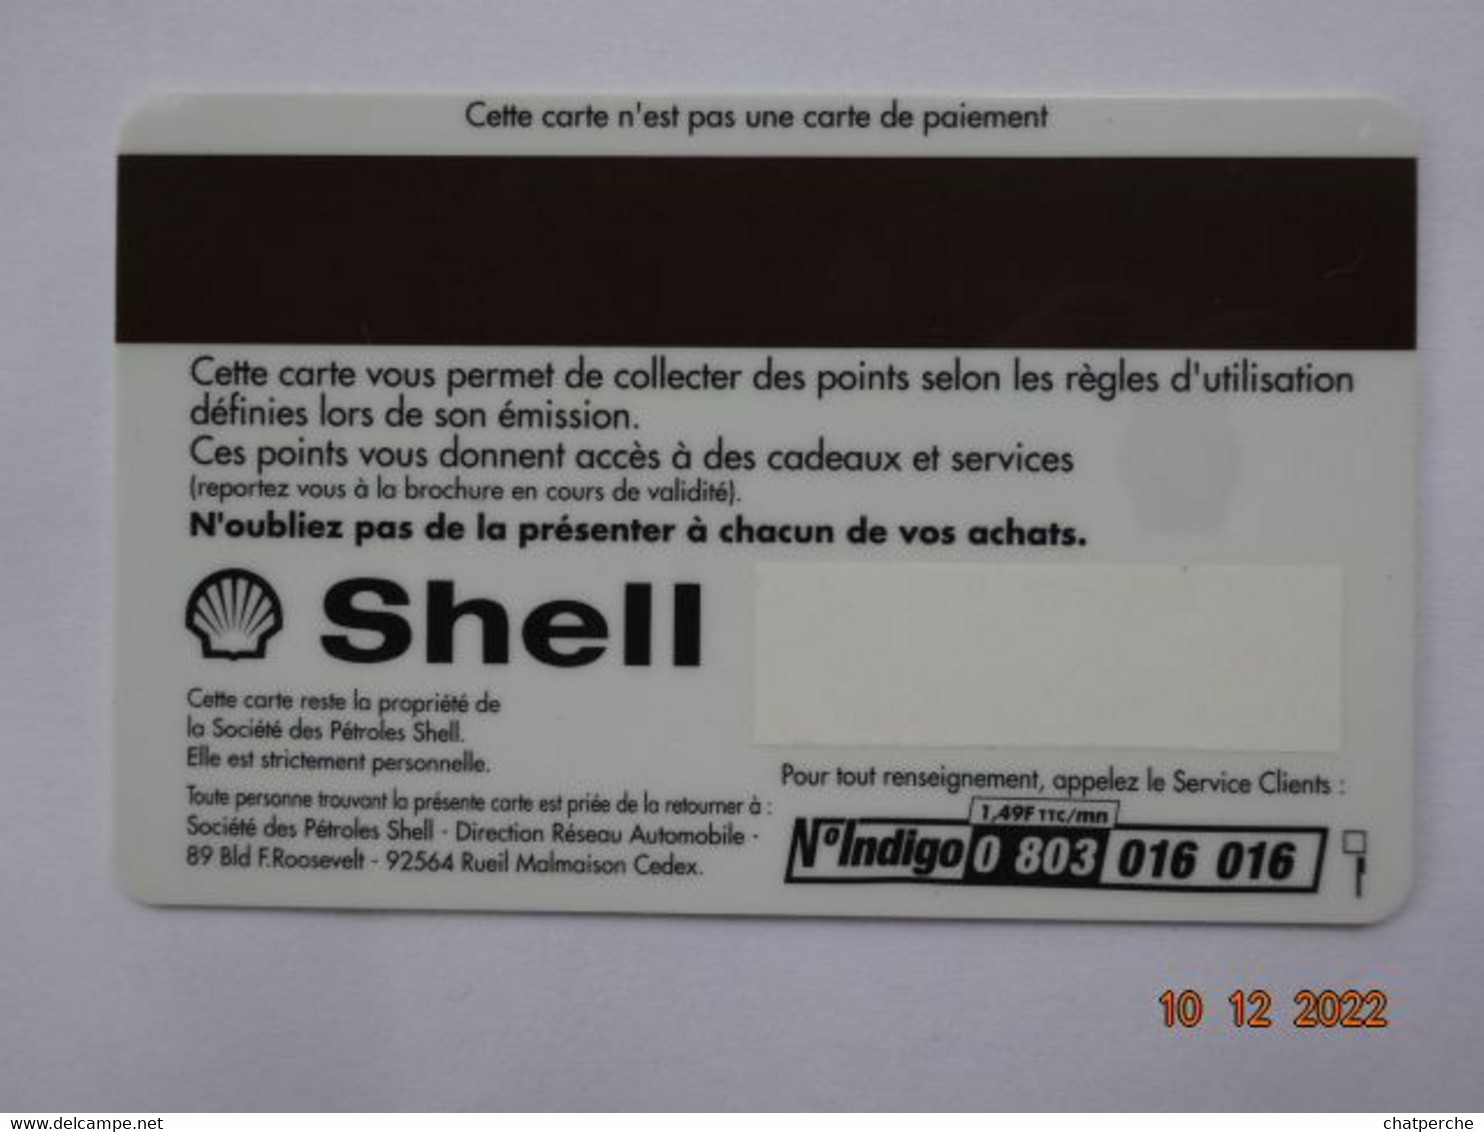 CARTE A PUCE CHIP CARD LAVAGE AUTO SHELL - Lavage Auto